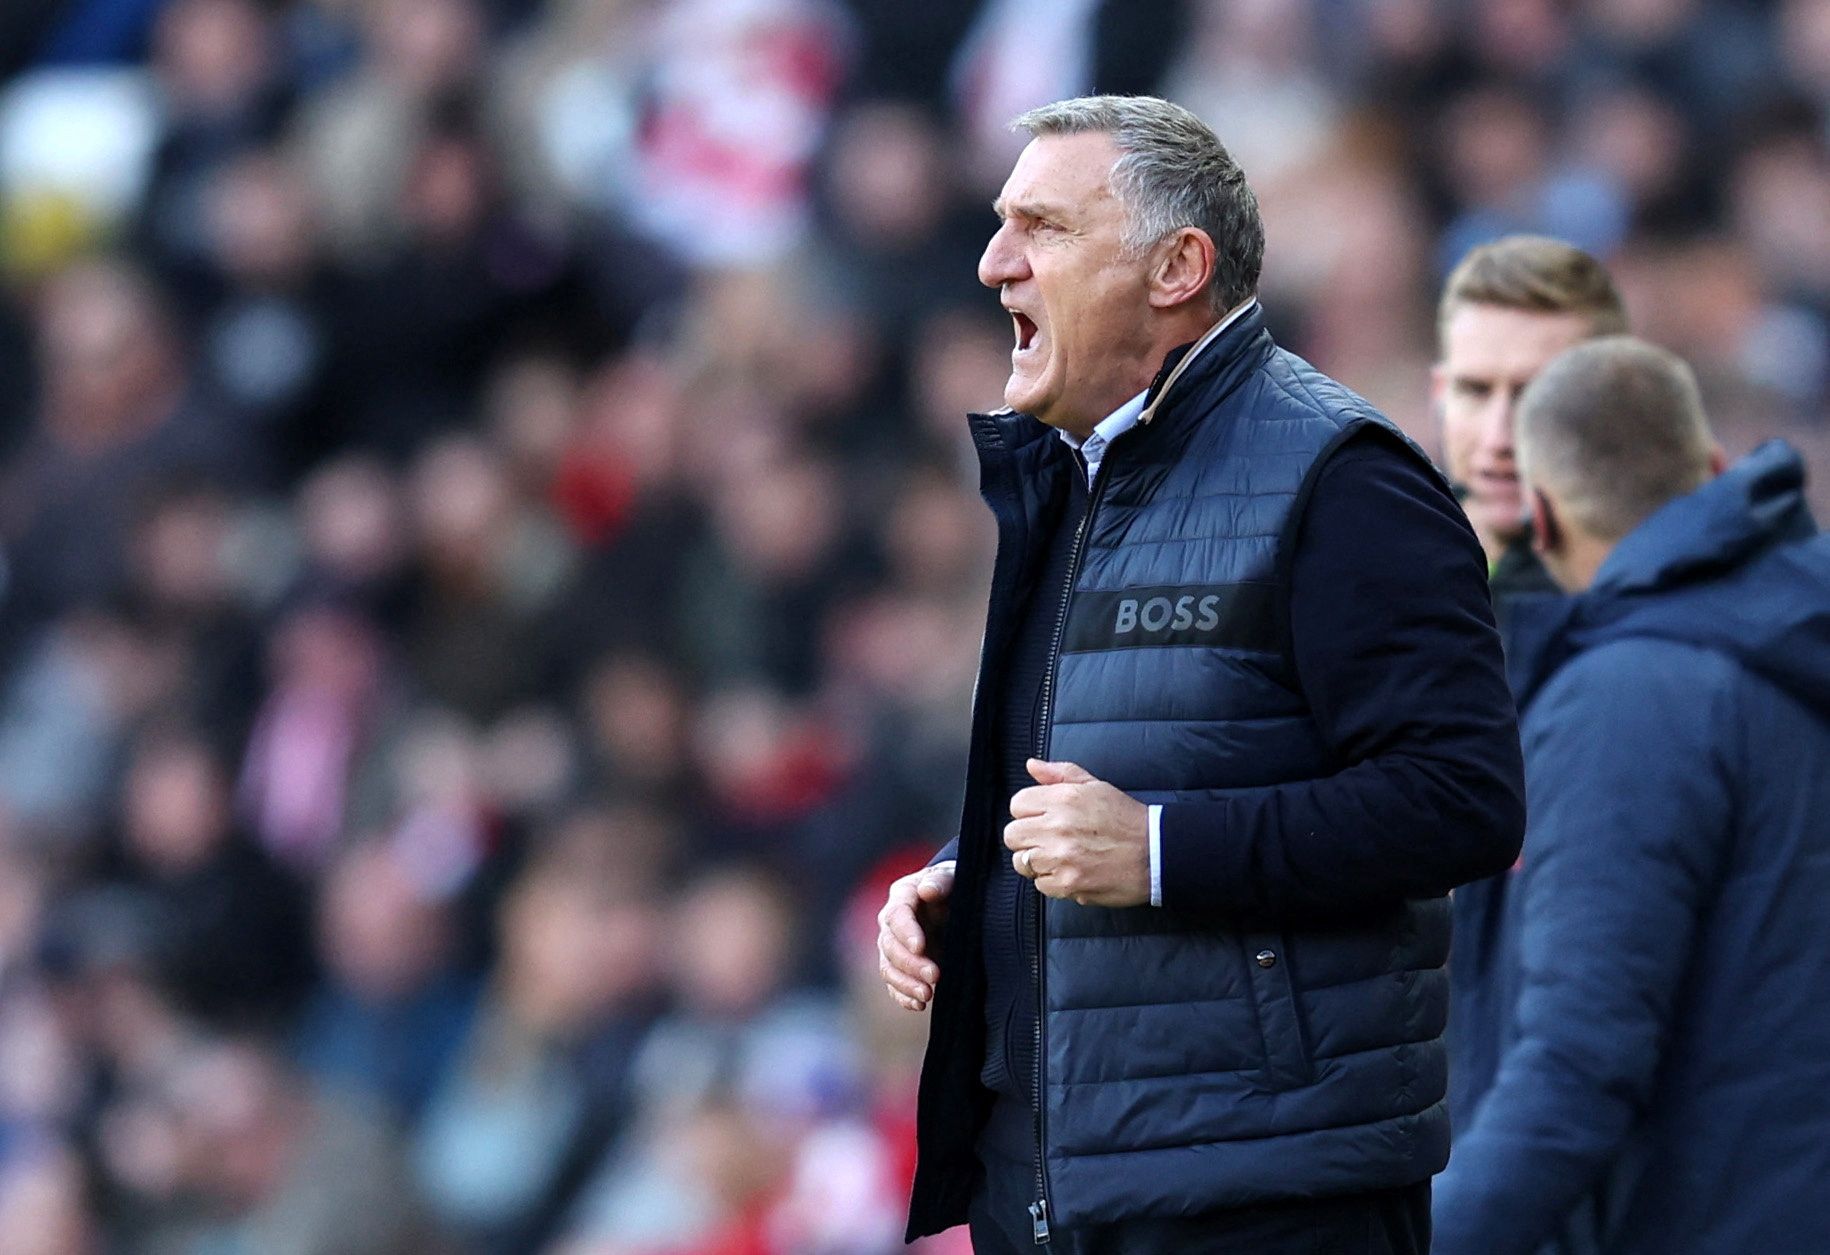 Soccer Football - Championship - Sunderland v Blackburn Rovers - Stadium of Light, Sunderland, Britain - December 26, 2022 Sunderland manager Tony Mowbray  Action Images/John Clifton  EDITORIAL USE ONLY. No use with unauthorized audio, video, data, fixture lists, club/league logos or 